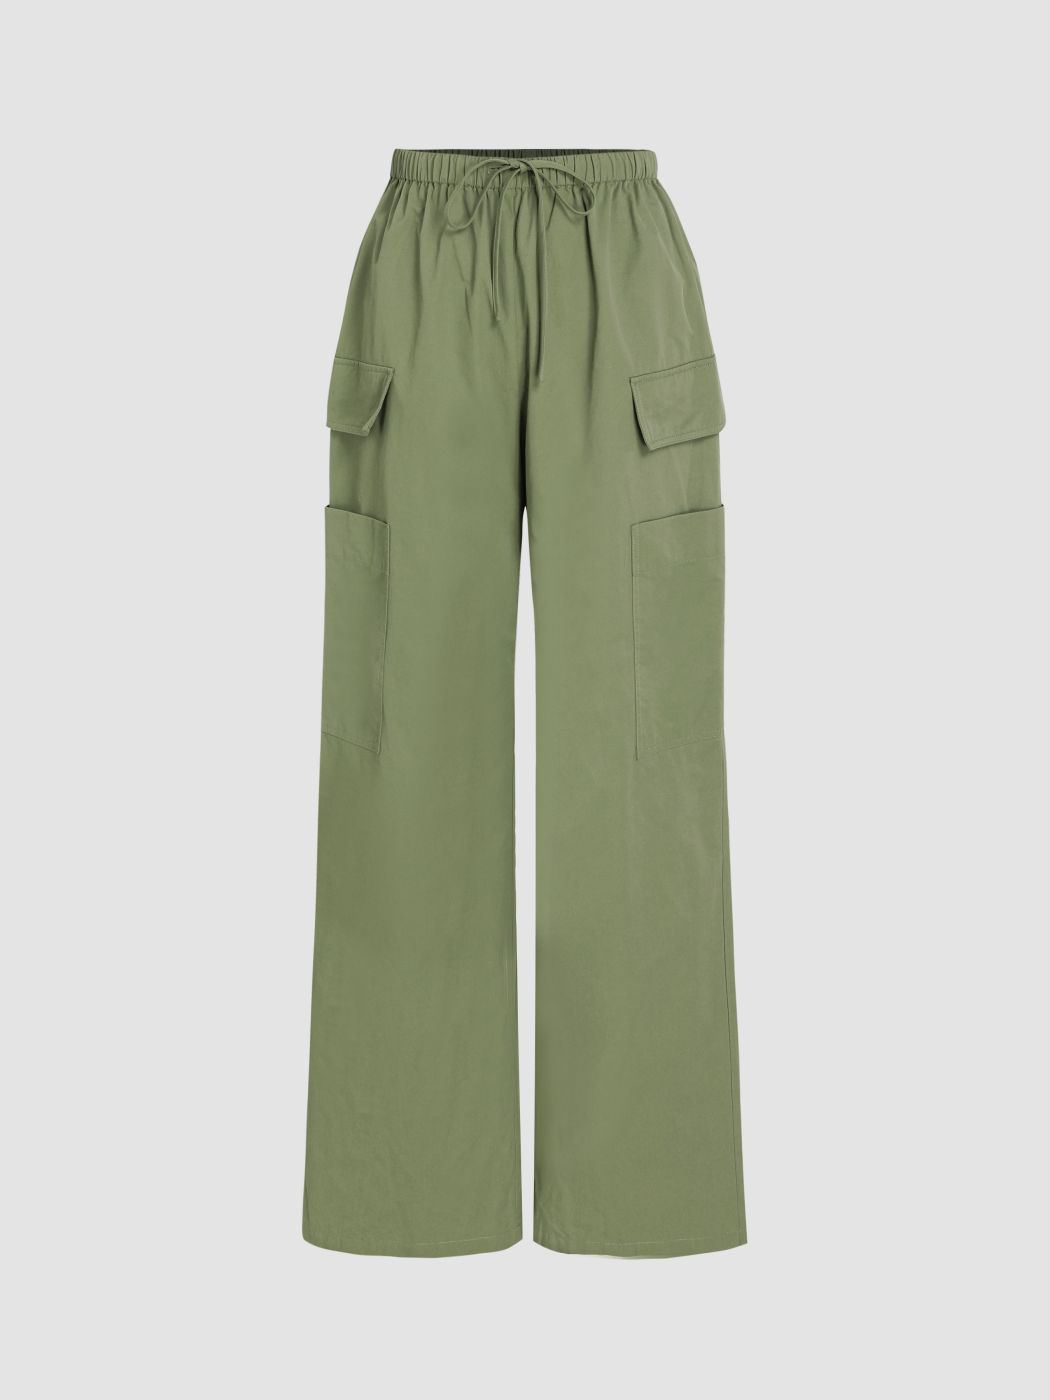 Cargo Knotted Pocket Wide Leg Trousers For School Daily Casual